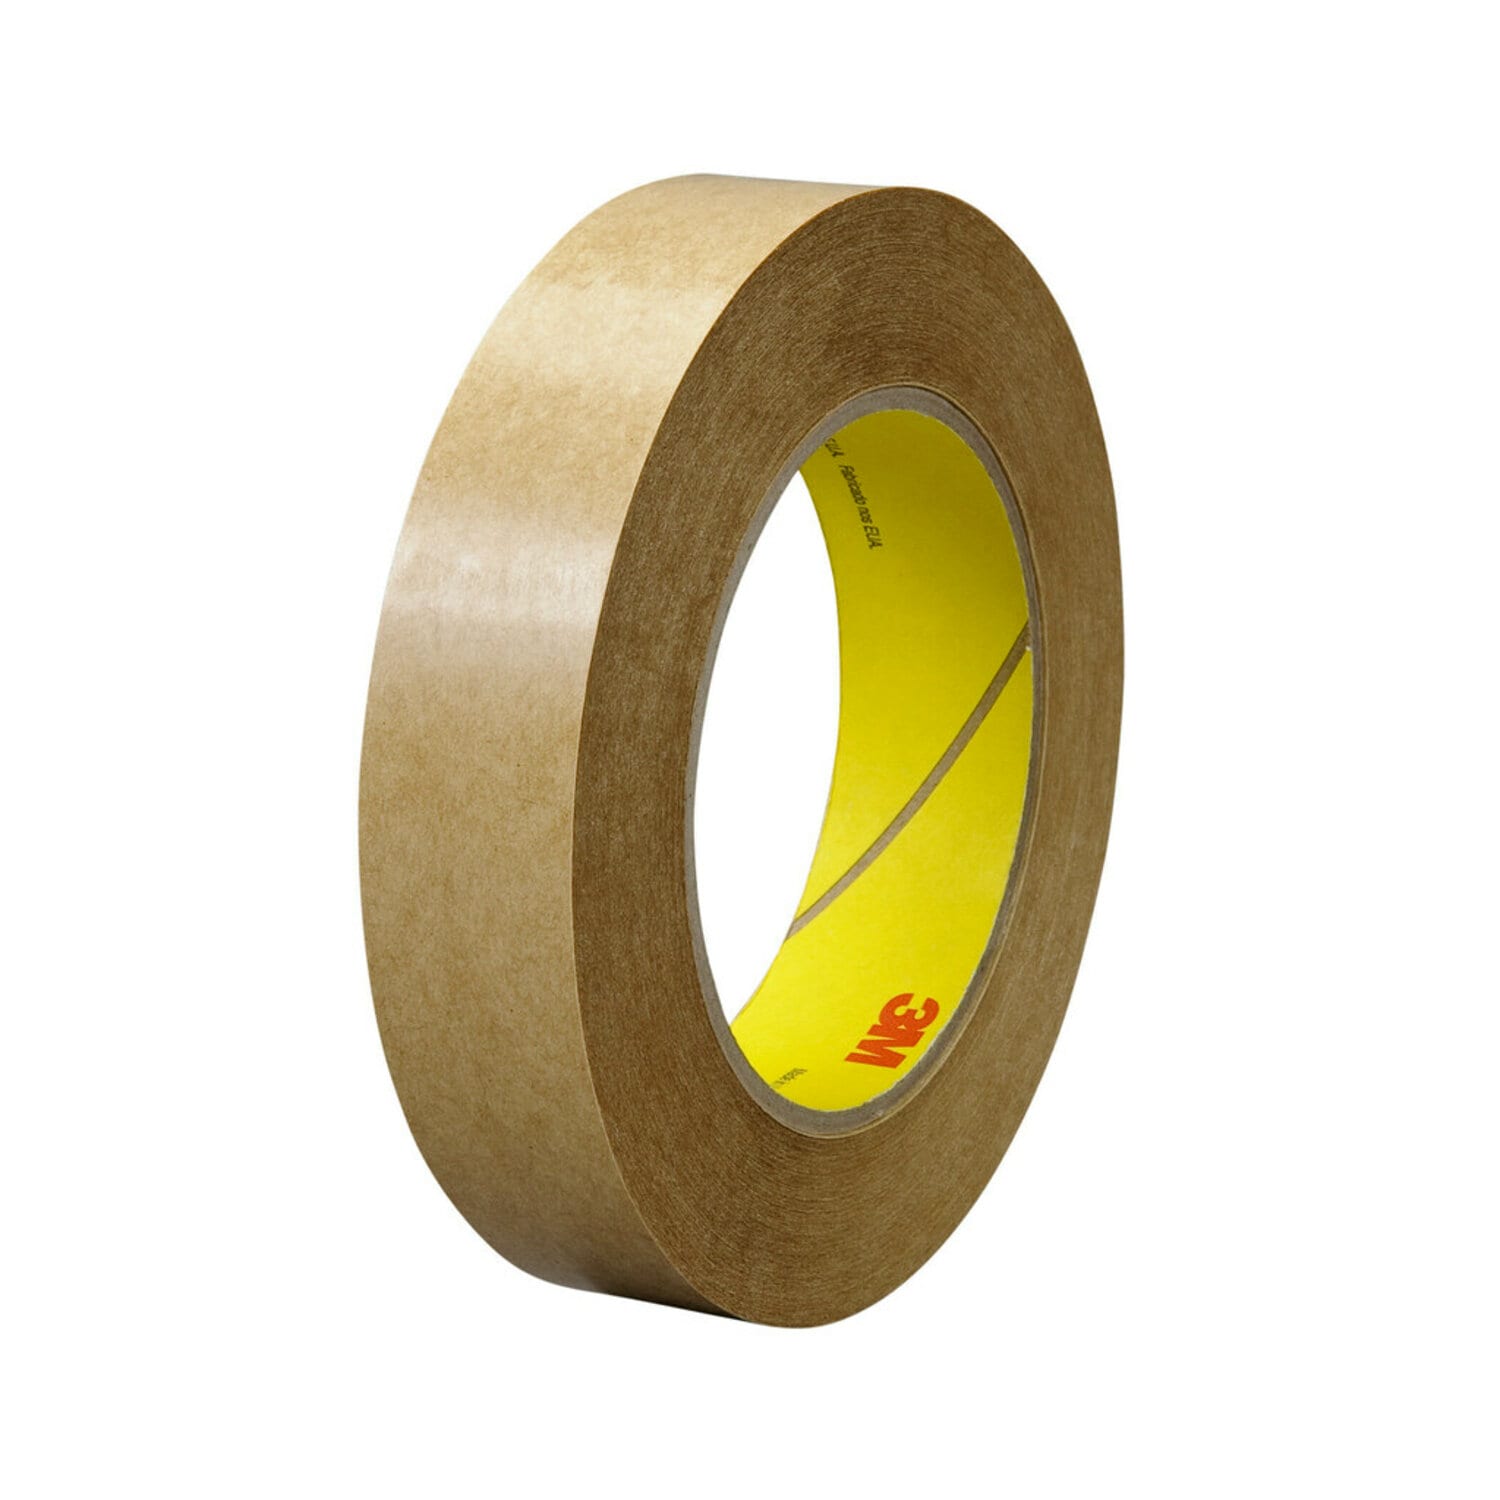 https://www.e-aircraftsupply.com/ItemImages/02/602319E_3mtm-adhesive-transfer-tape-463-tan-liner-yellow-core.jpg